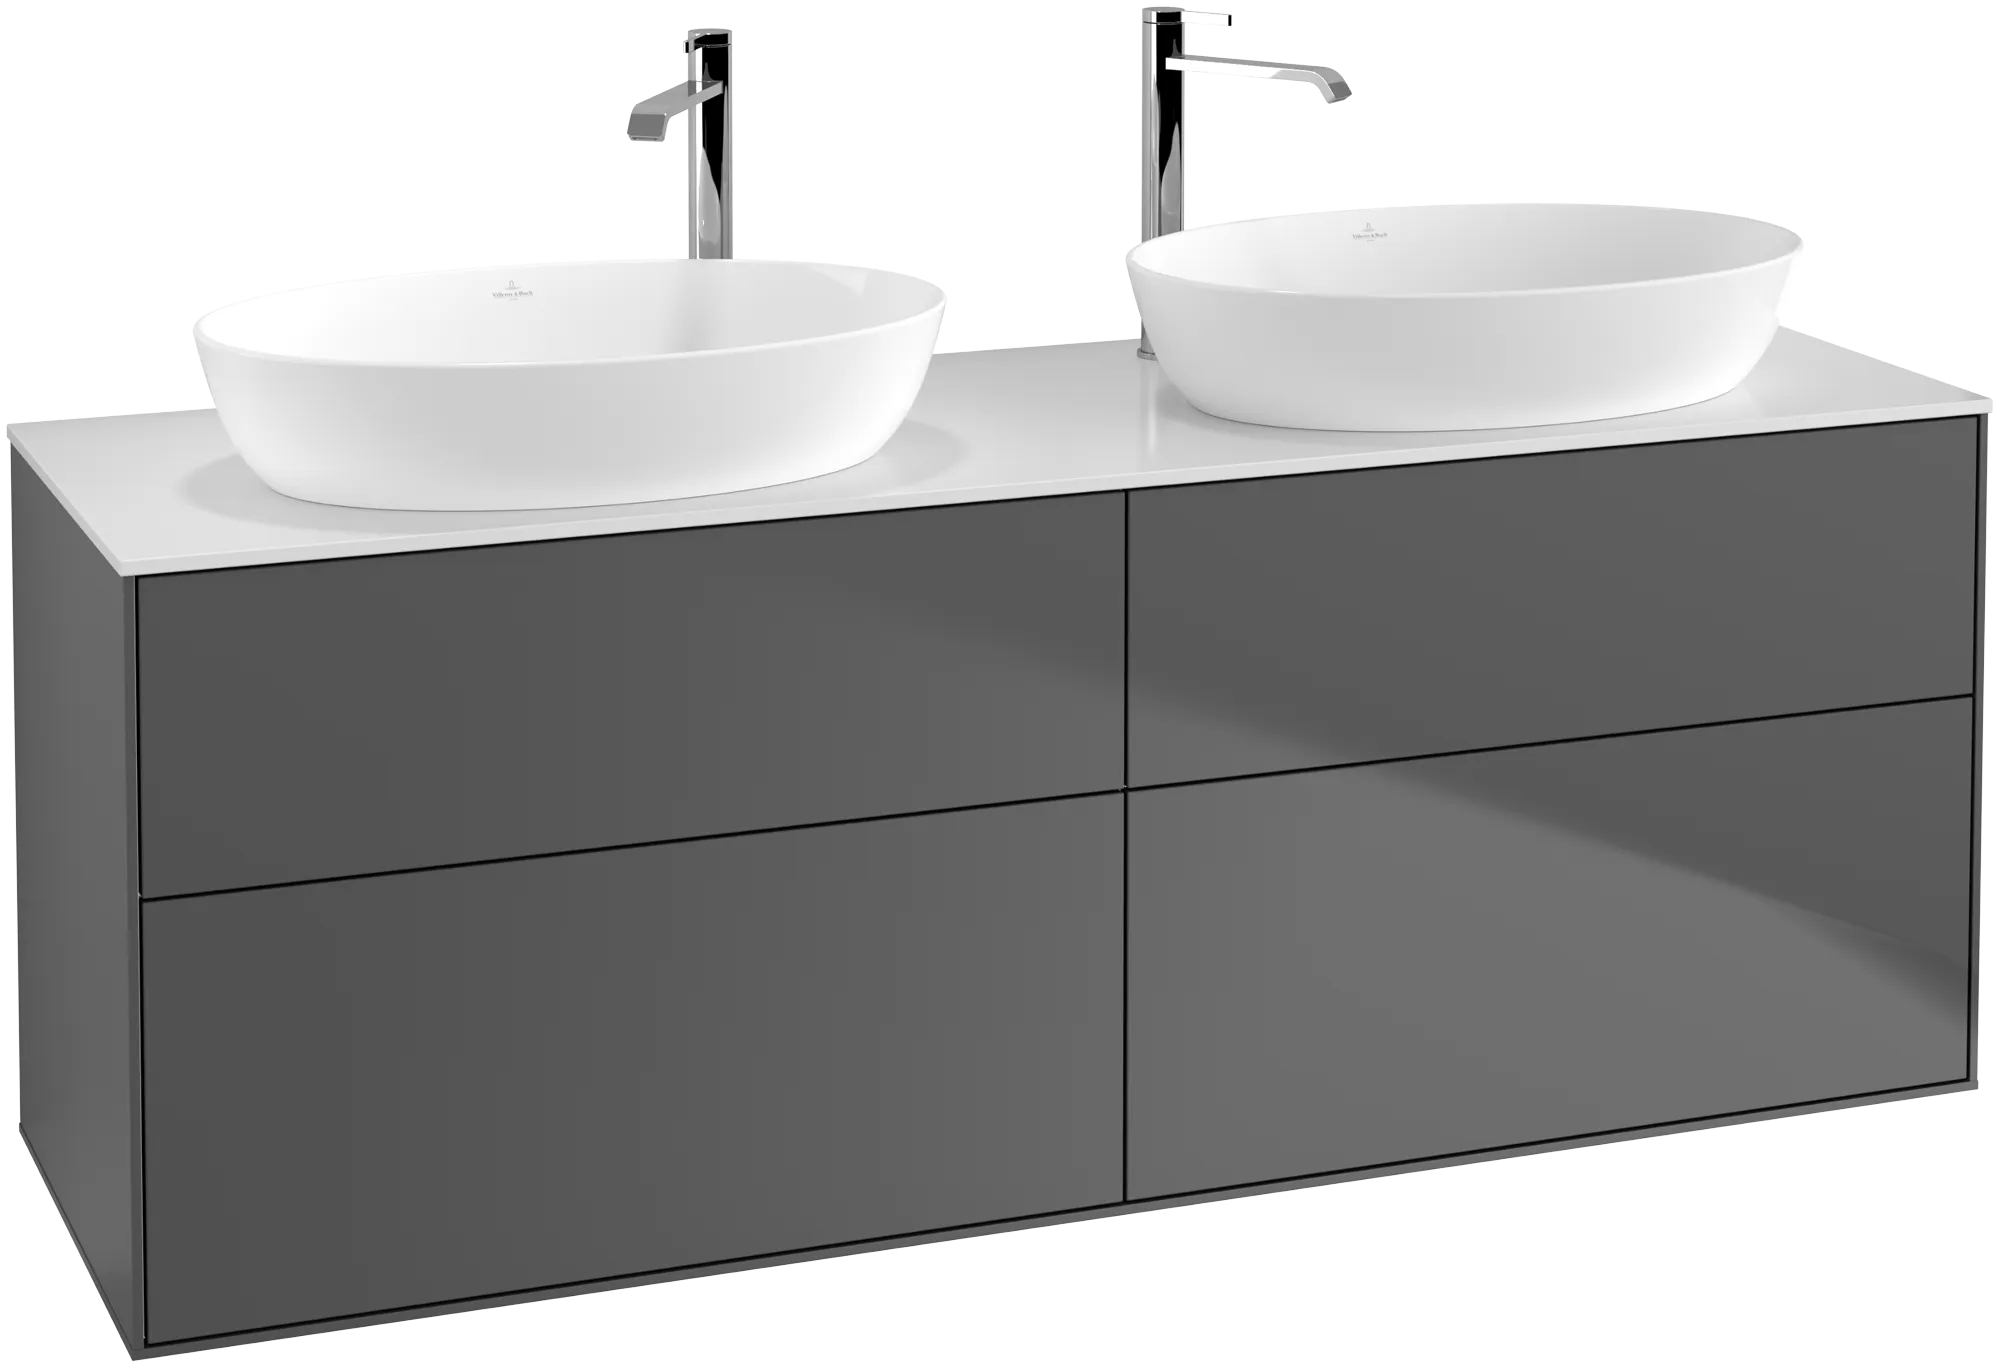 Picture of VILLEROY BOCH Finion Vanity unit, with lighting, 4 pull-out compartments, 1600 x 603 x 501 mm, Anthracite Matt Lacquer / Glass White Matt #G96100GK